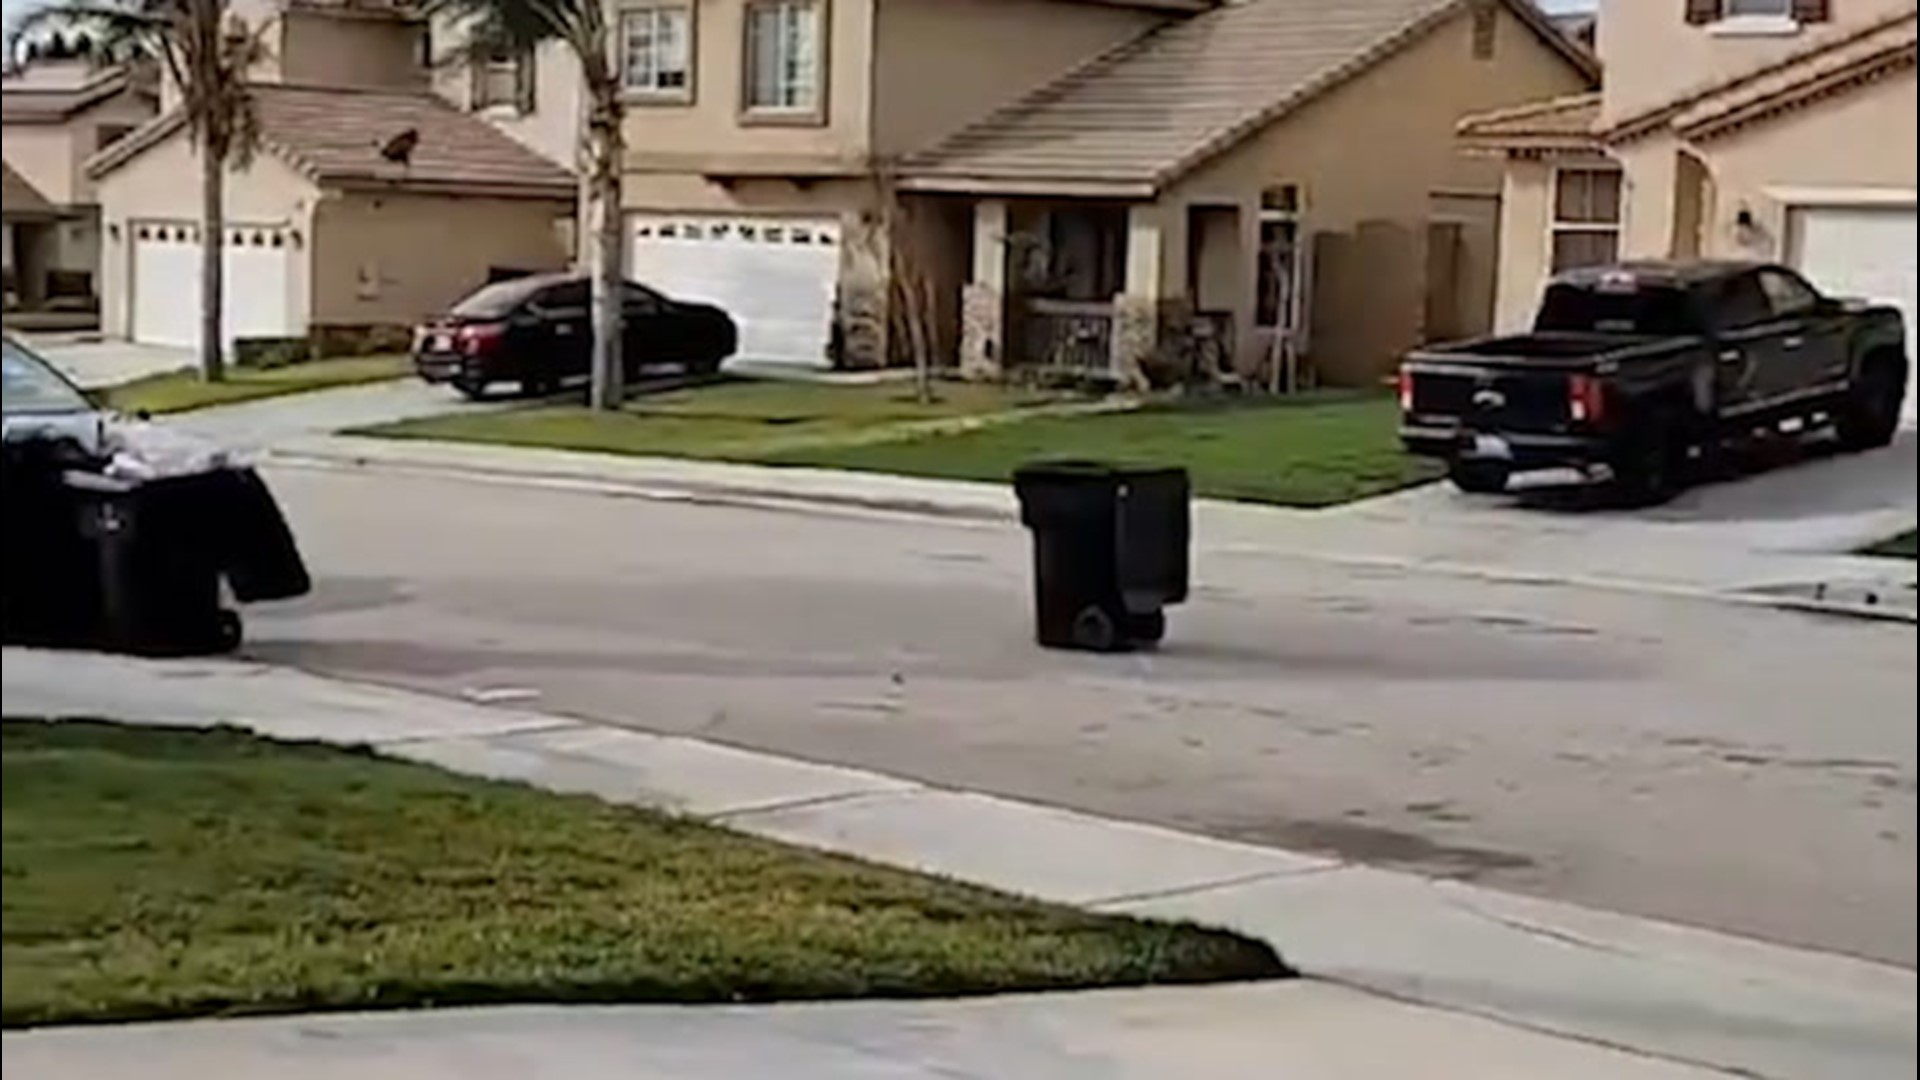 As heavy winds blew across Southern California on Jan. 21, Holly Henning watched as a neighbor's trash can seemed to roll down their street of its own accord.